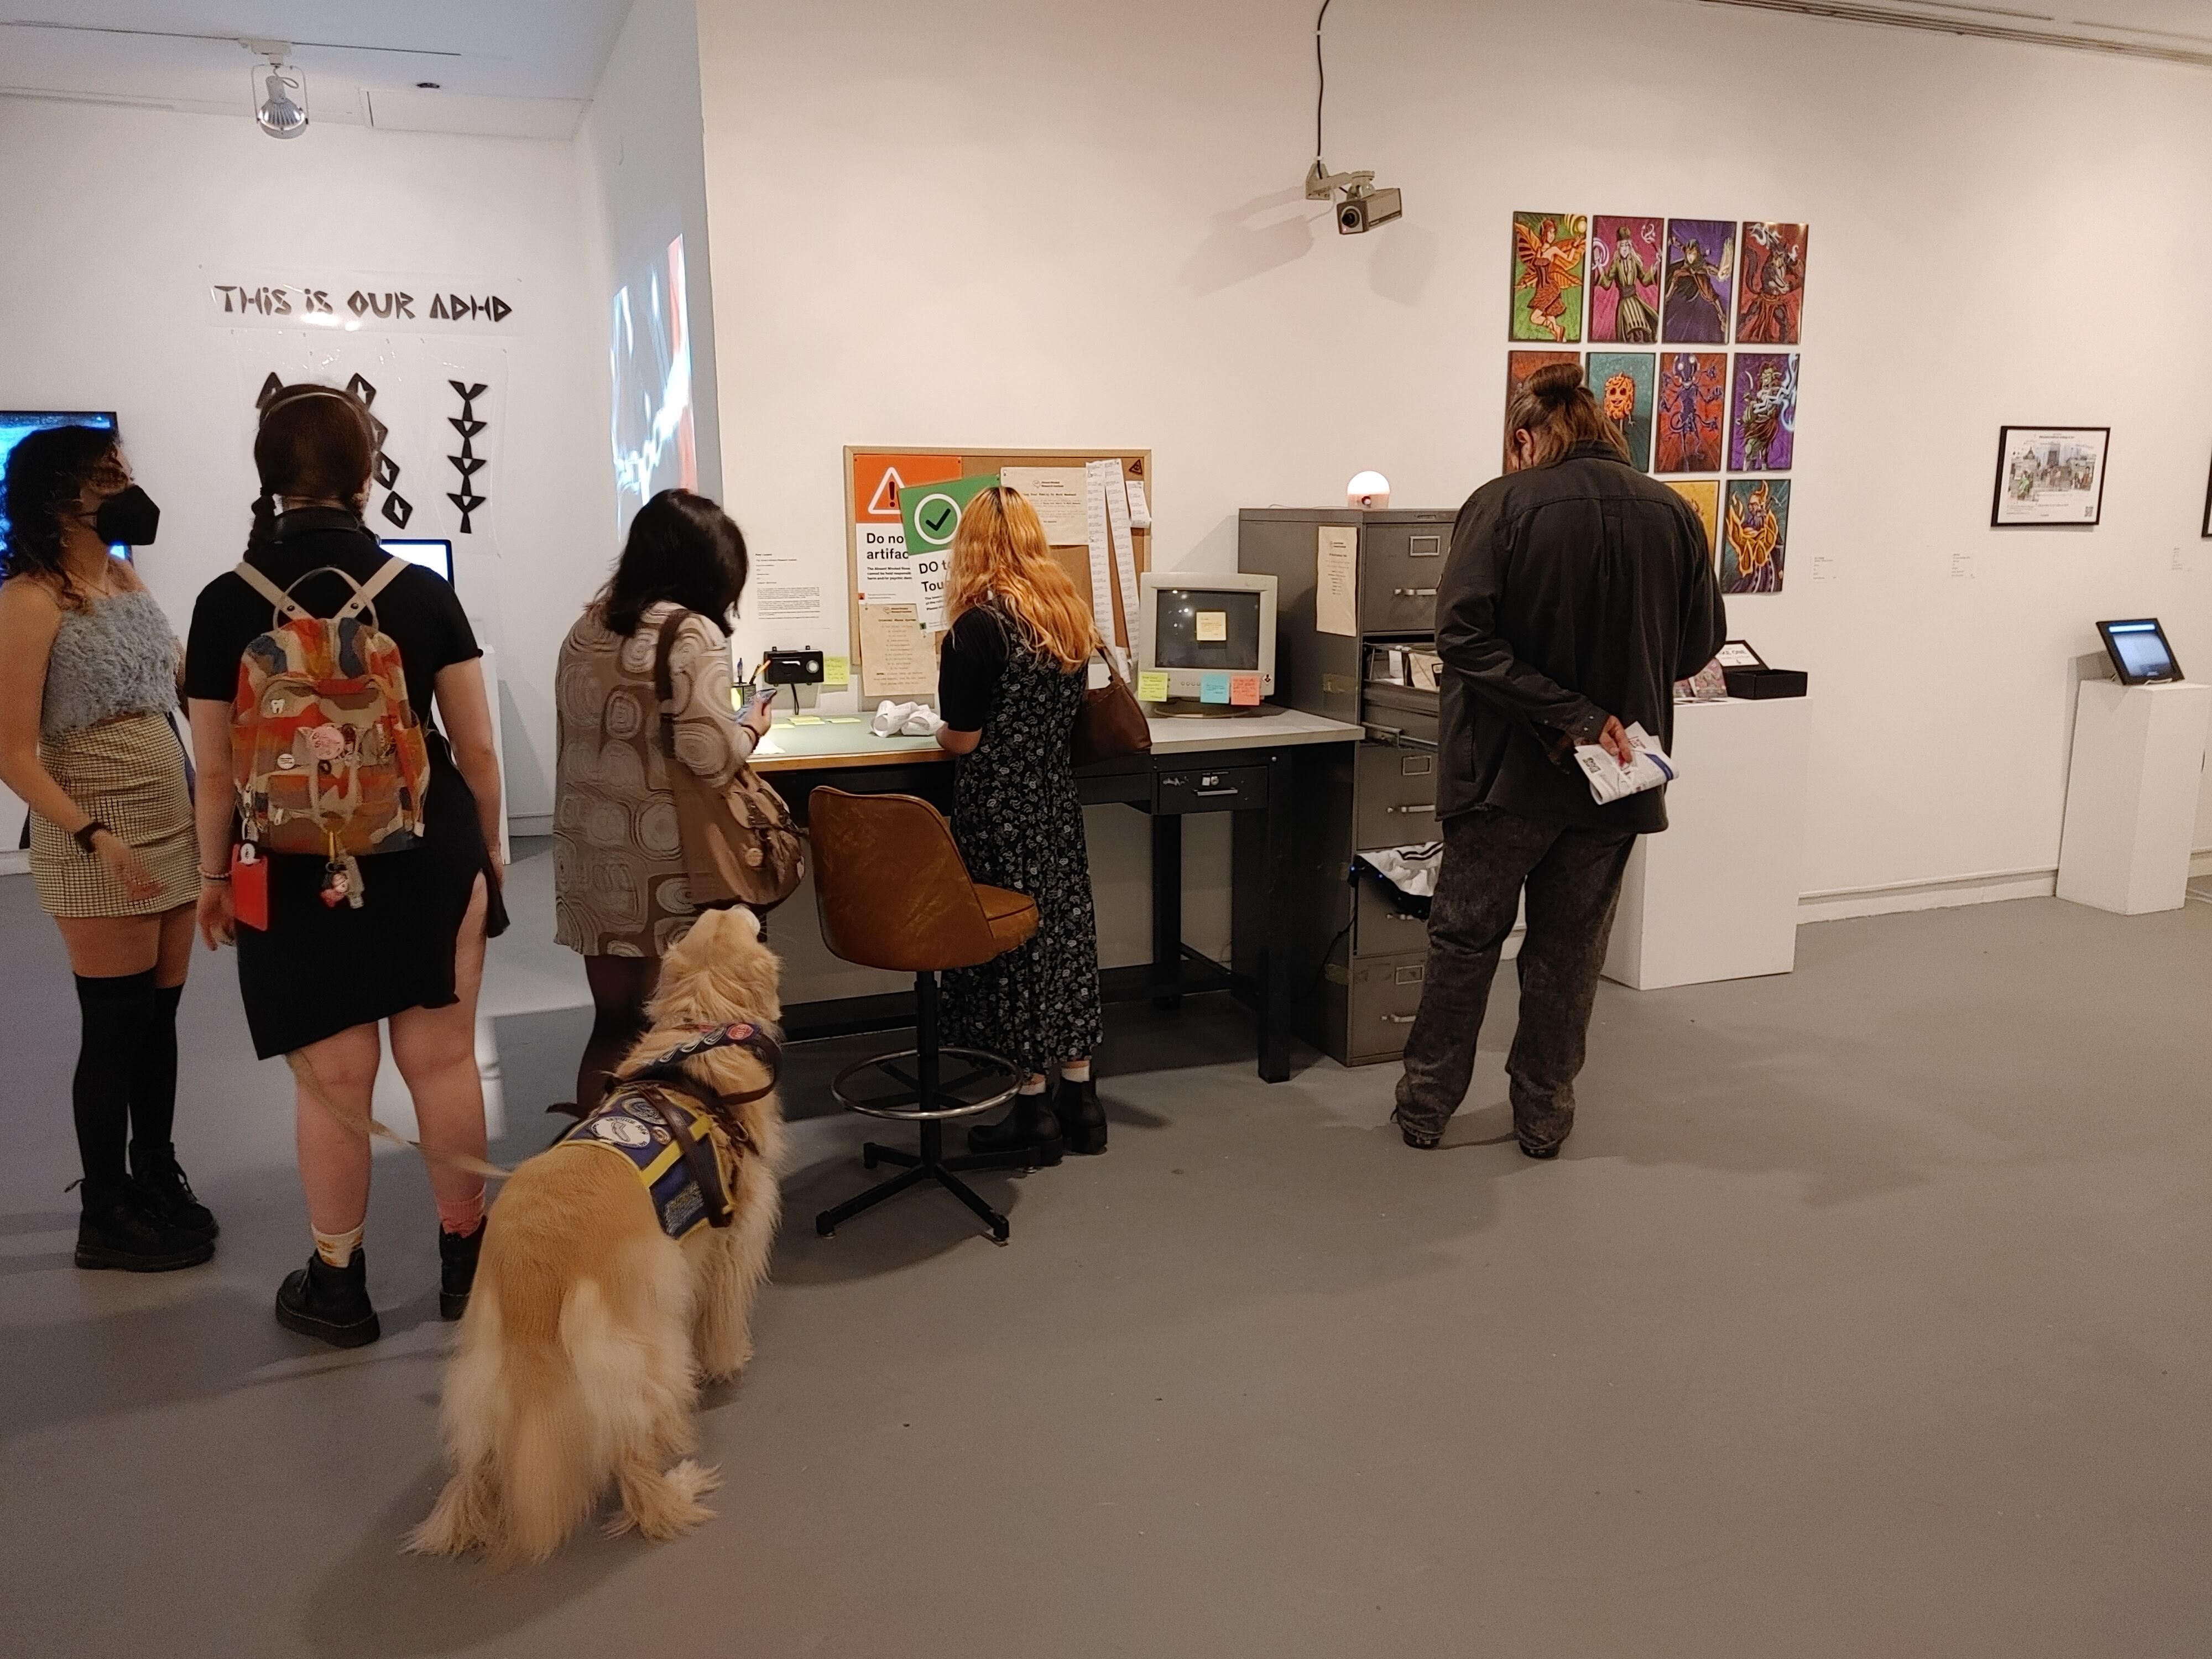 Photograph of thesis project on display. Several people and a dog are standing in front of it.